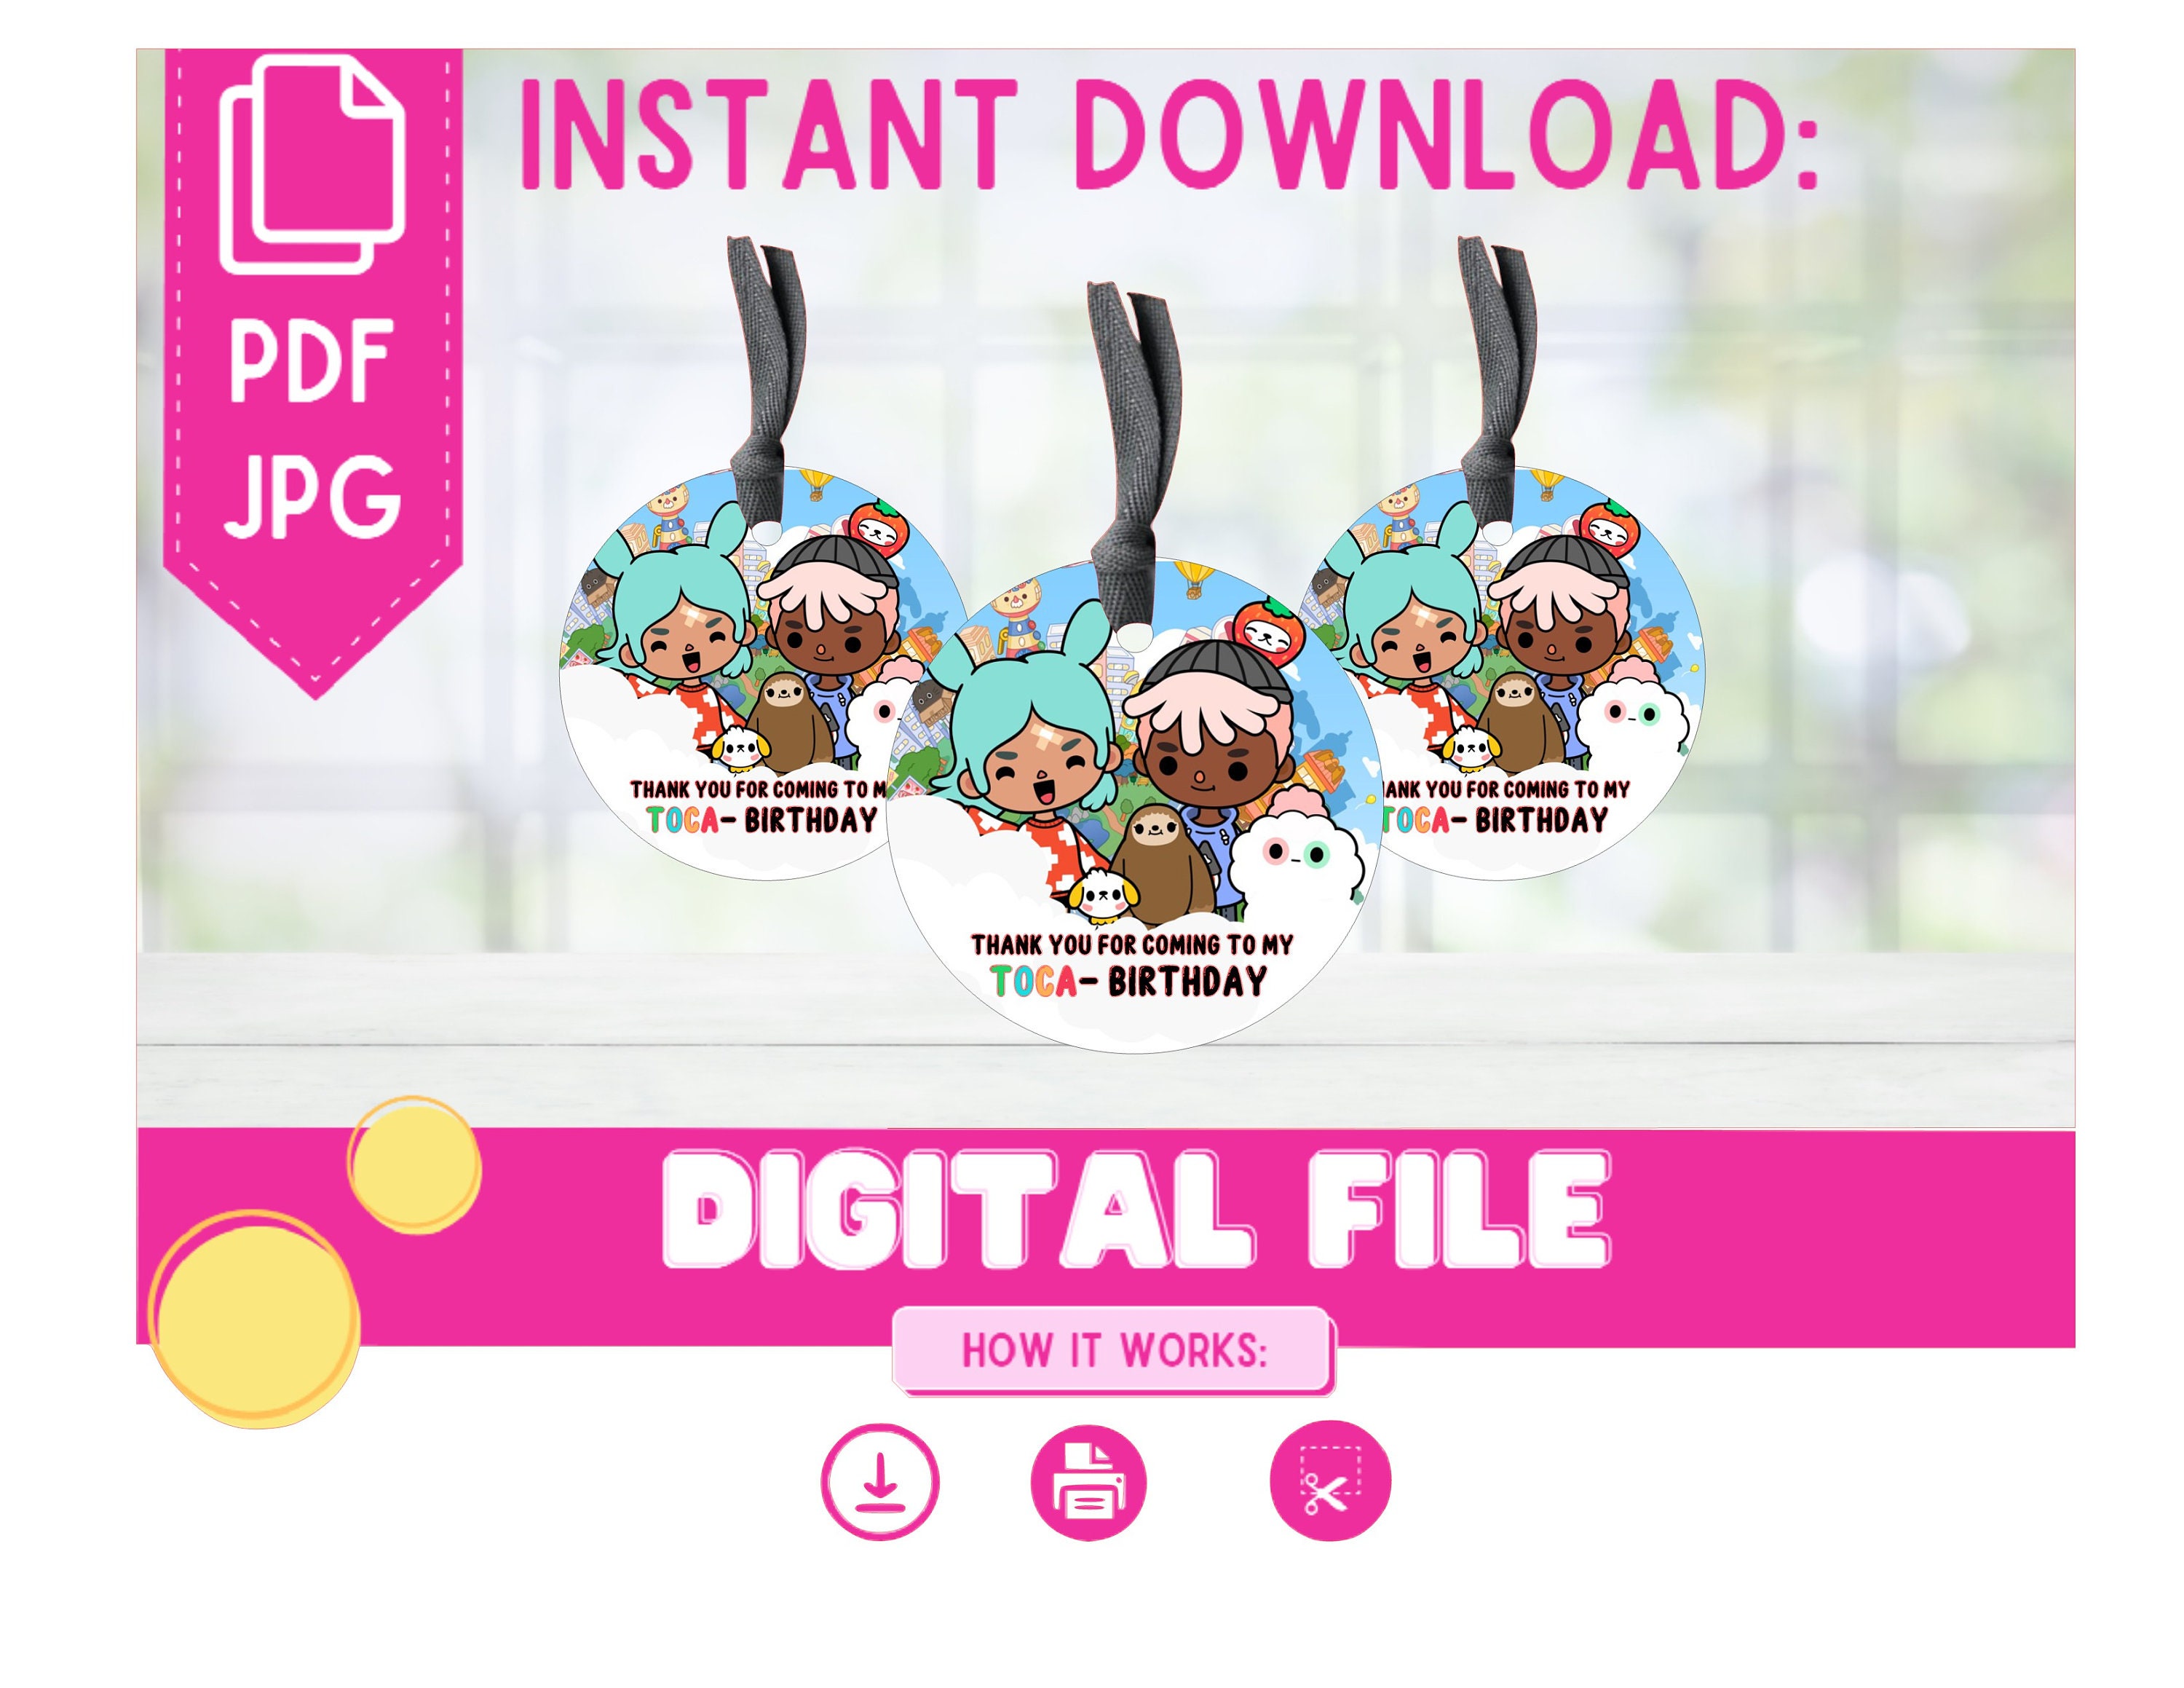 How to Download Toca Life World?